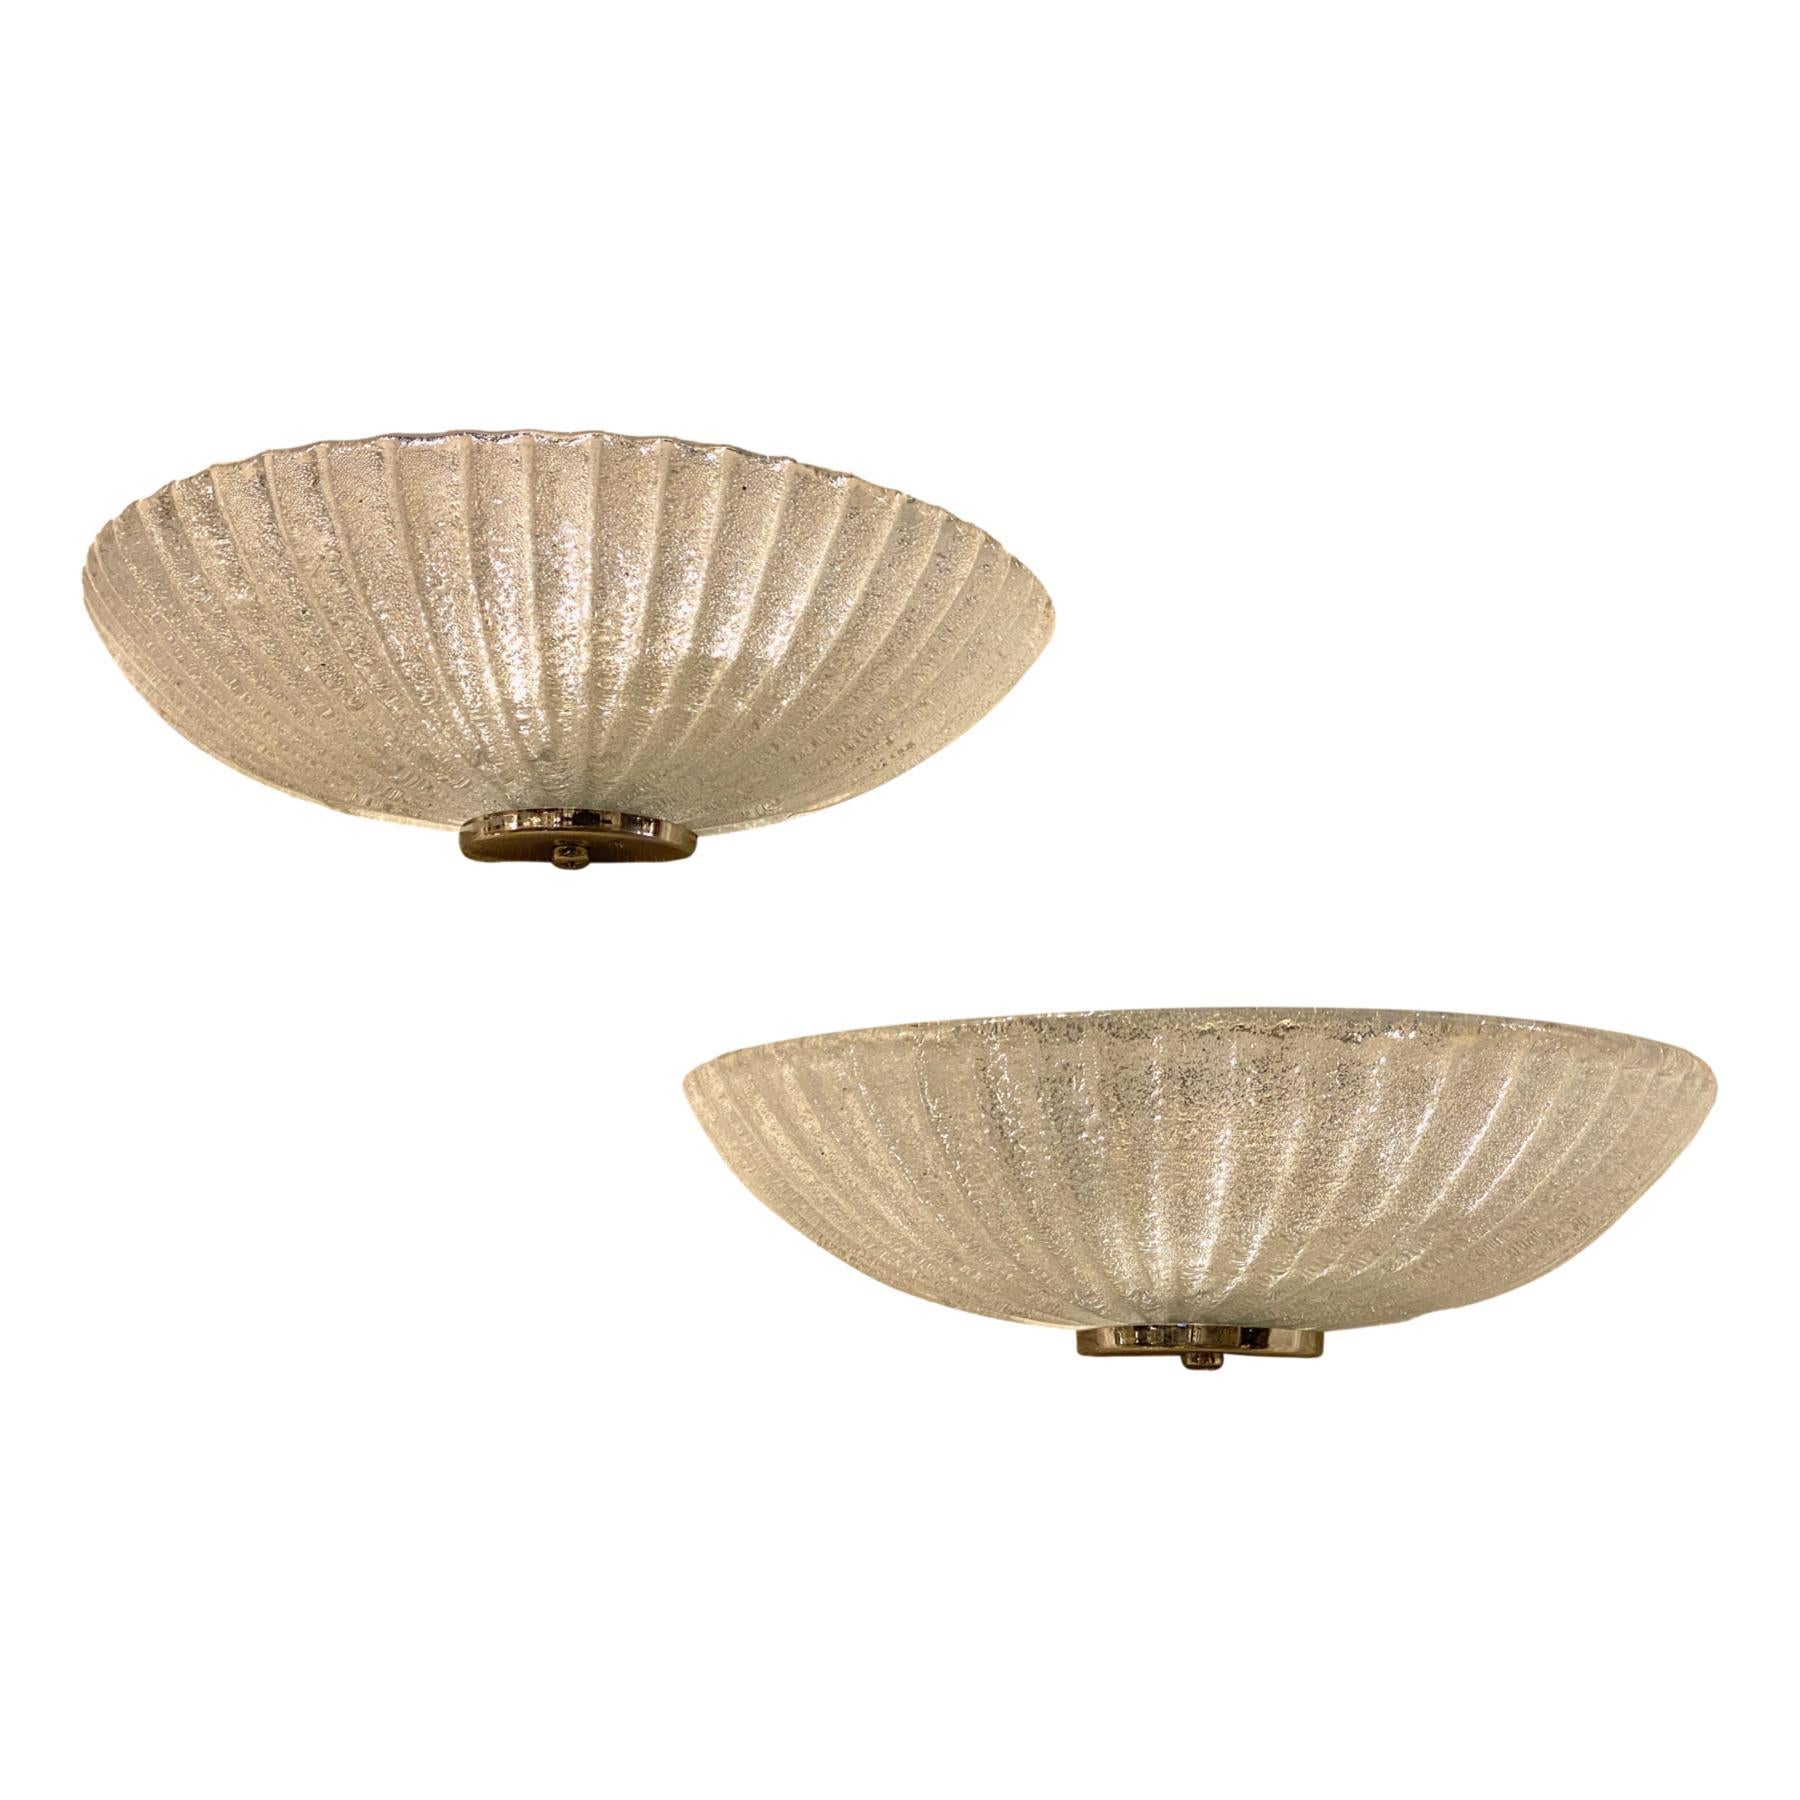 Pair of circa 1960's Italian glass wall sconces with nickel plated hardware.

Measurements:
Width 12